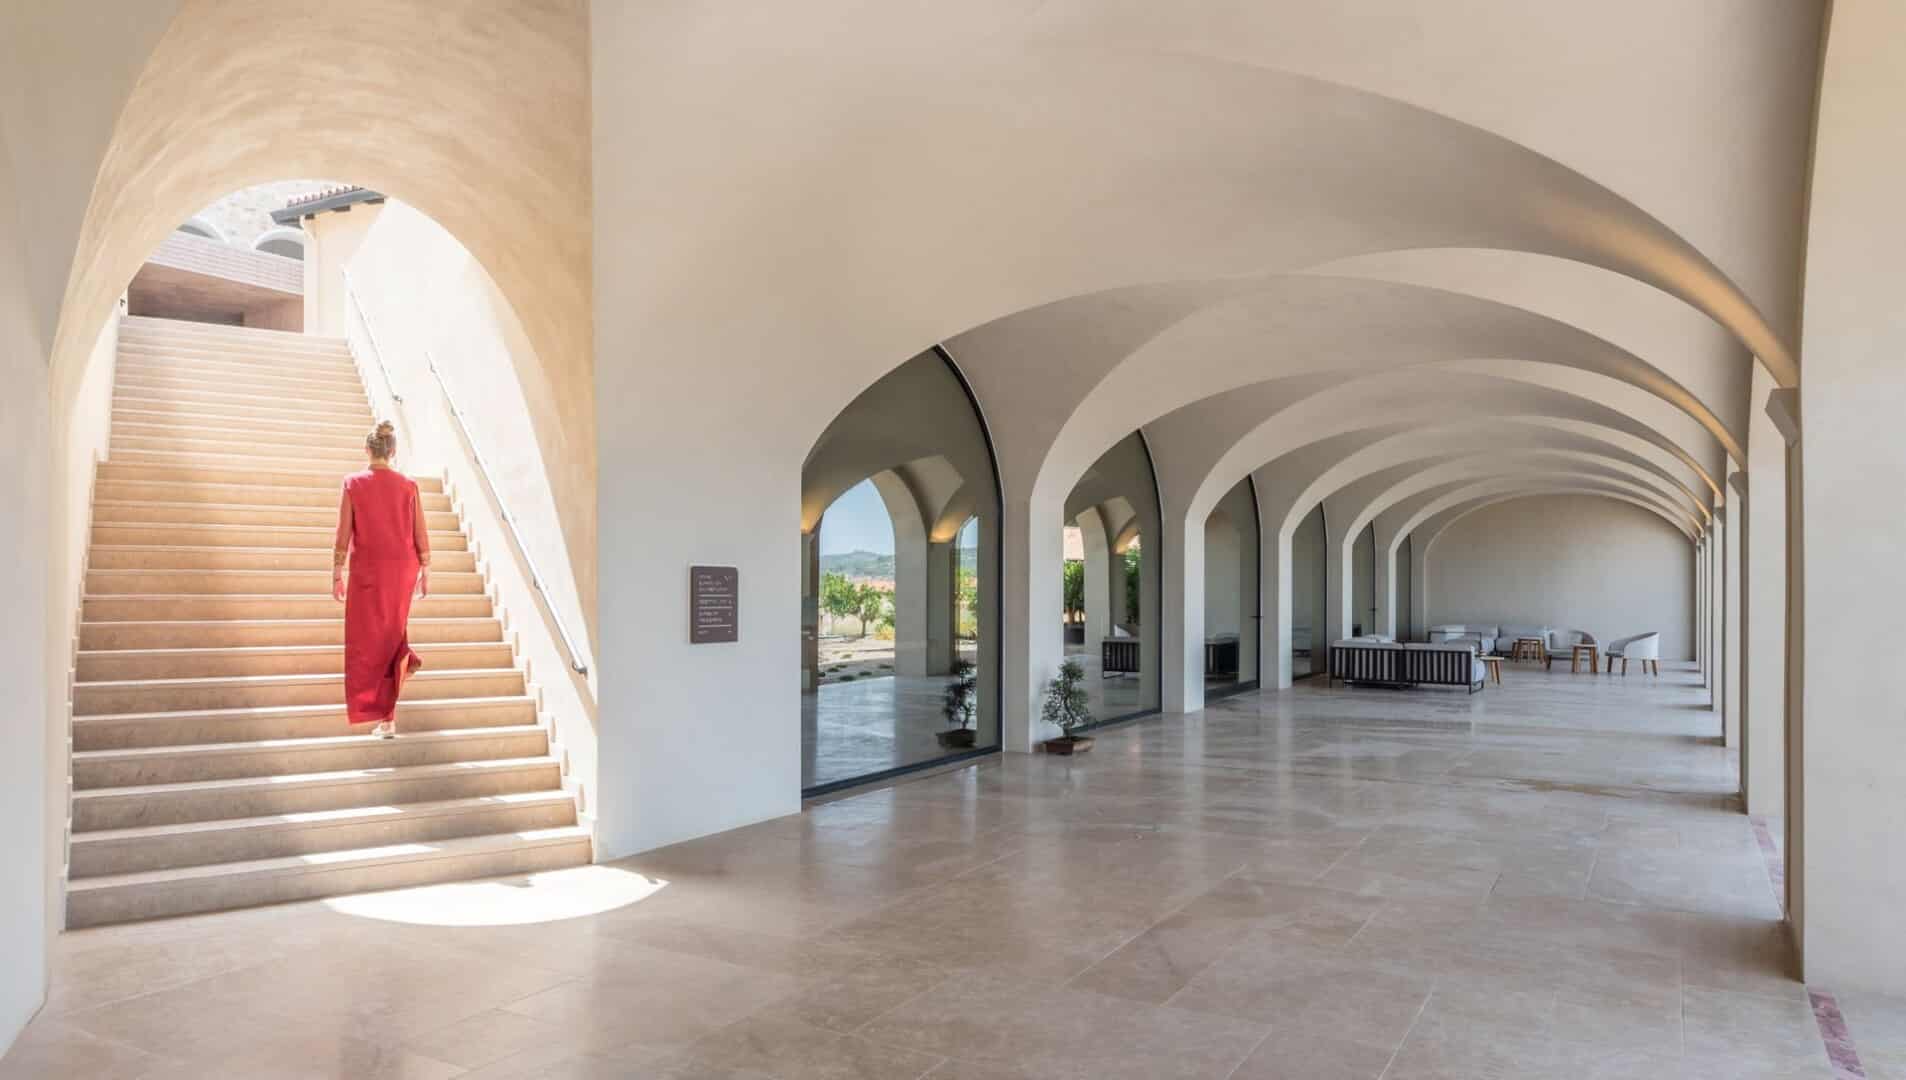 The expansive archways and stairs at Euphoria Retreat create a calming canvas.